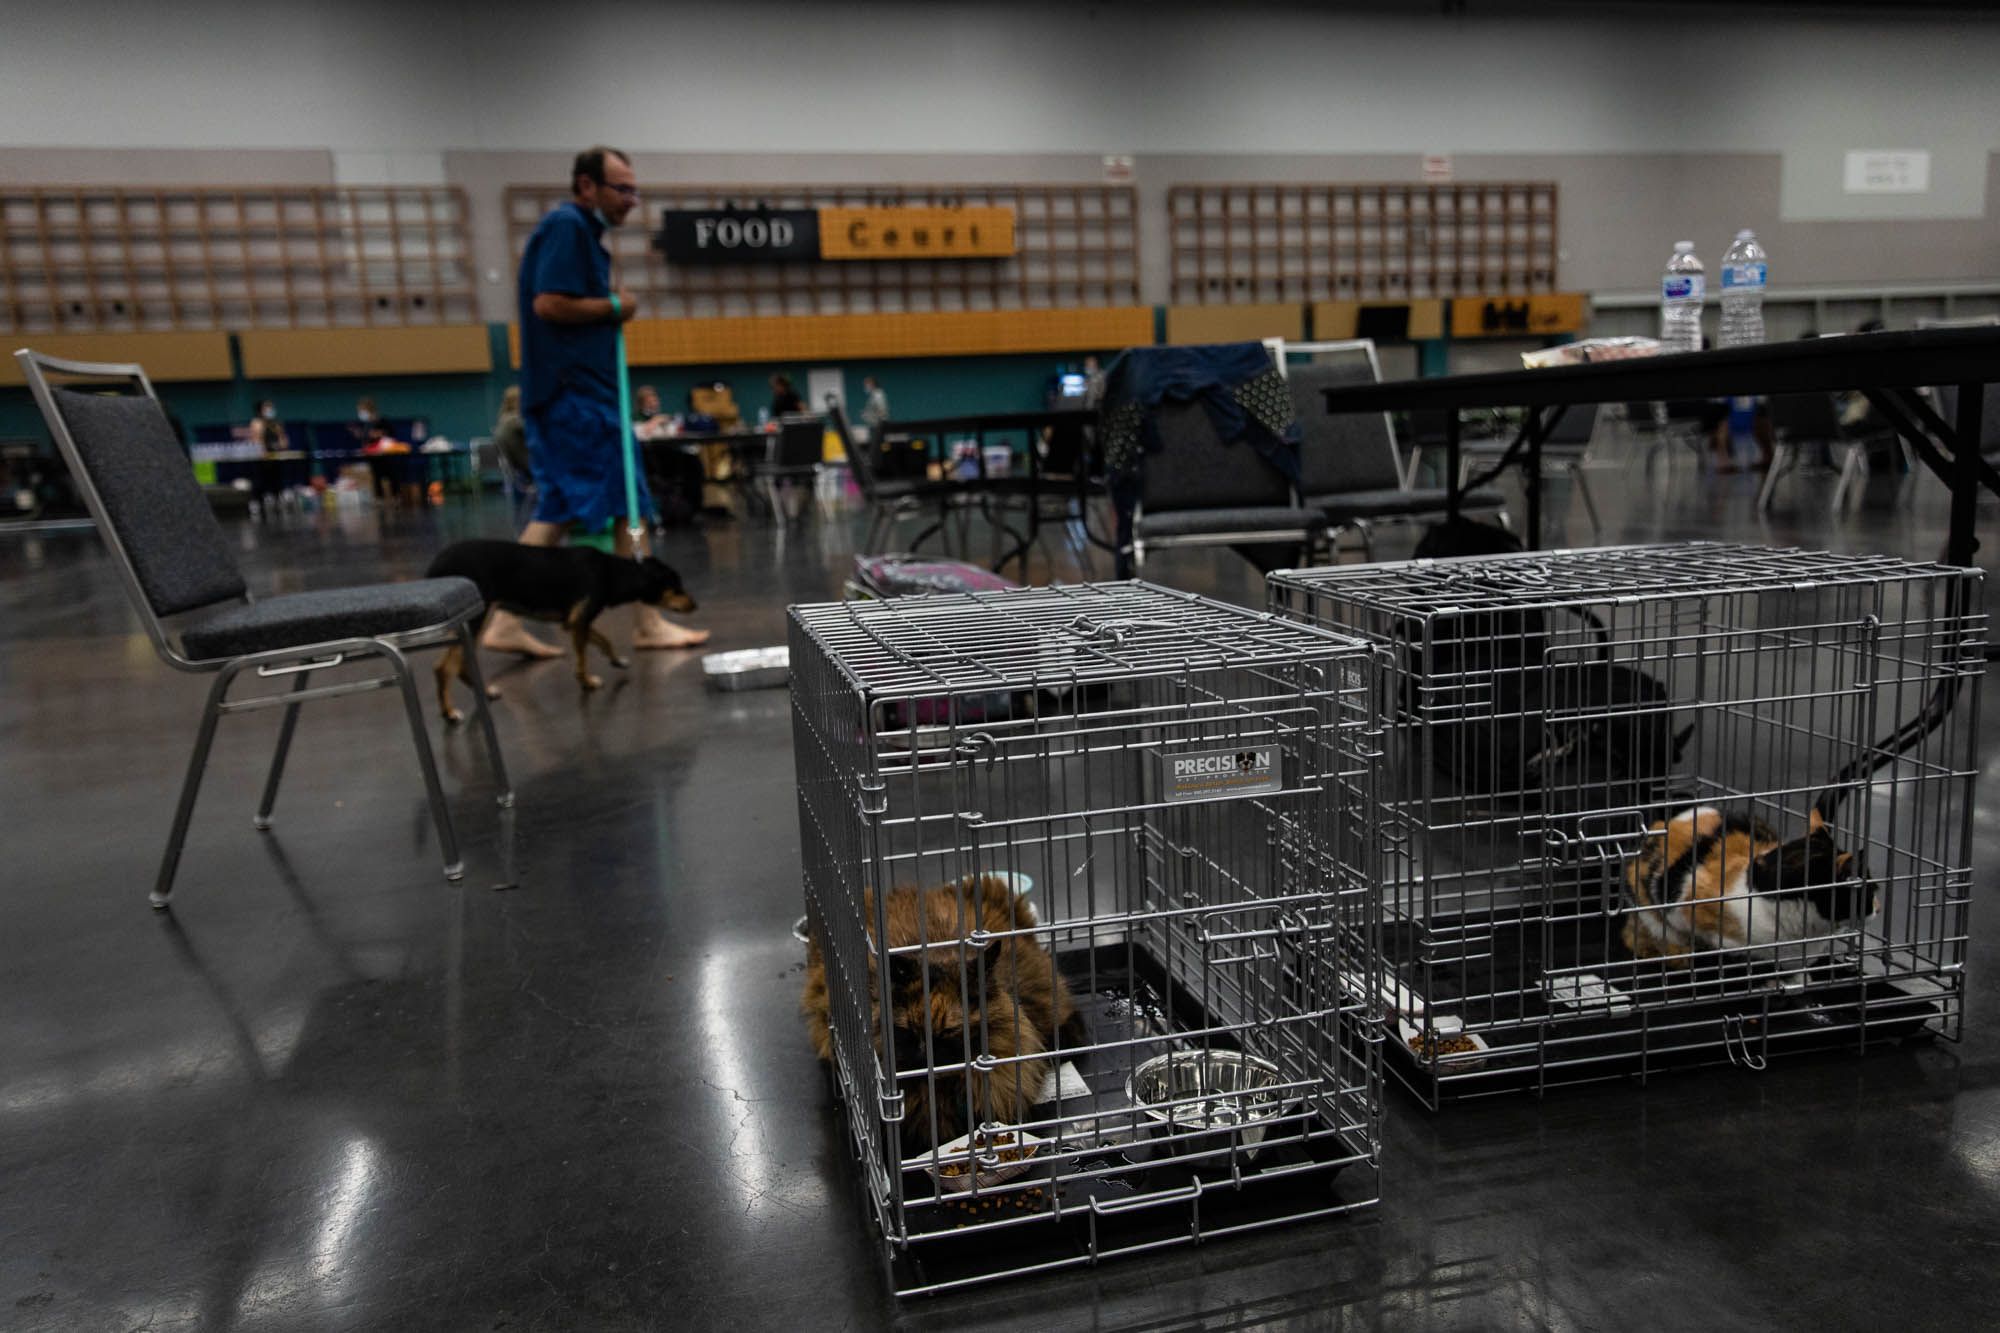 Pets sit in crates at a public cooling shelter set up at the Oregon Convention Center during a heatwave 